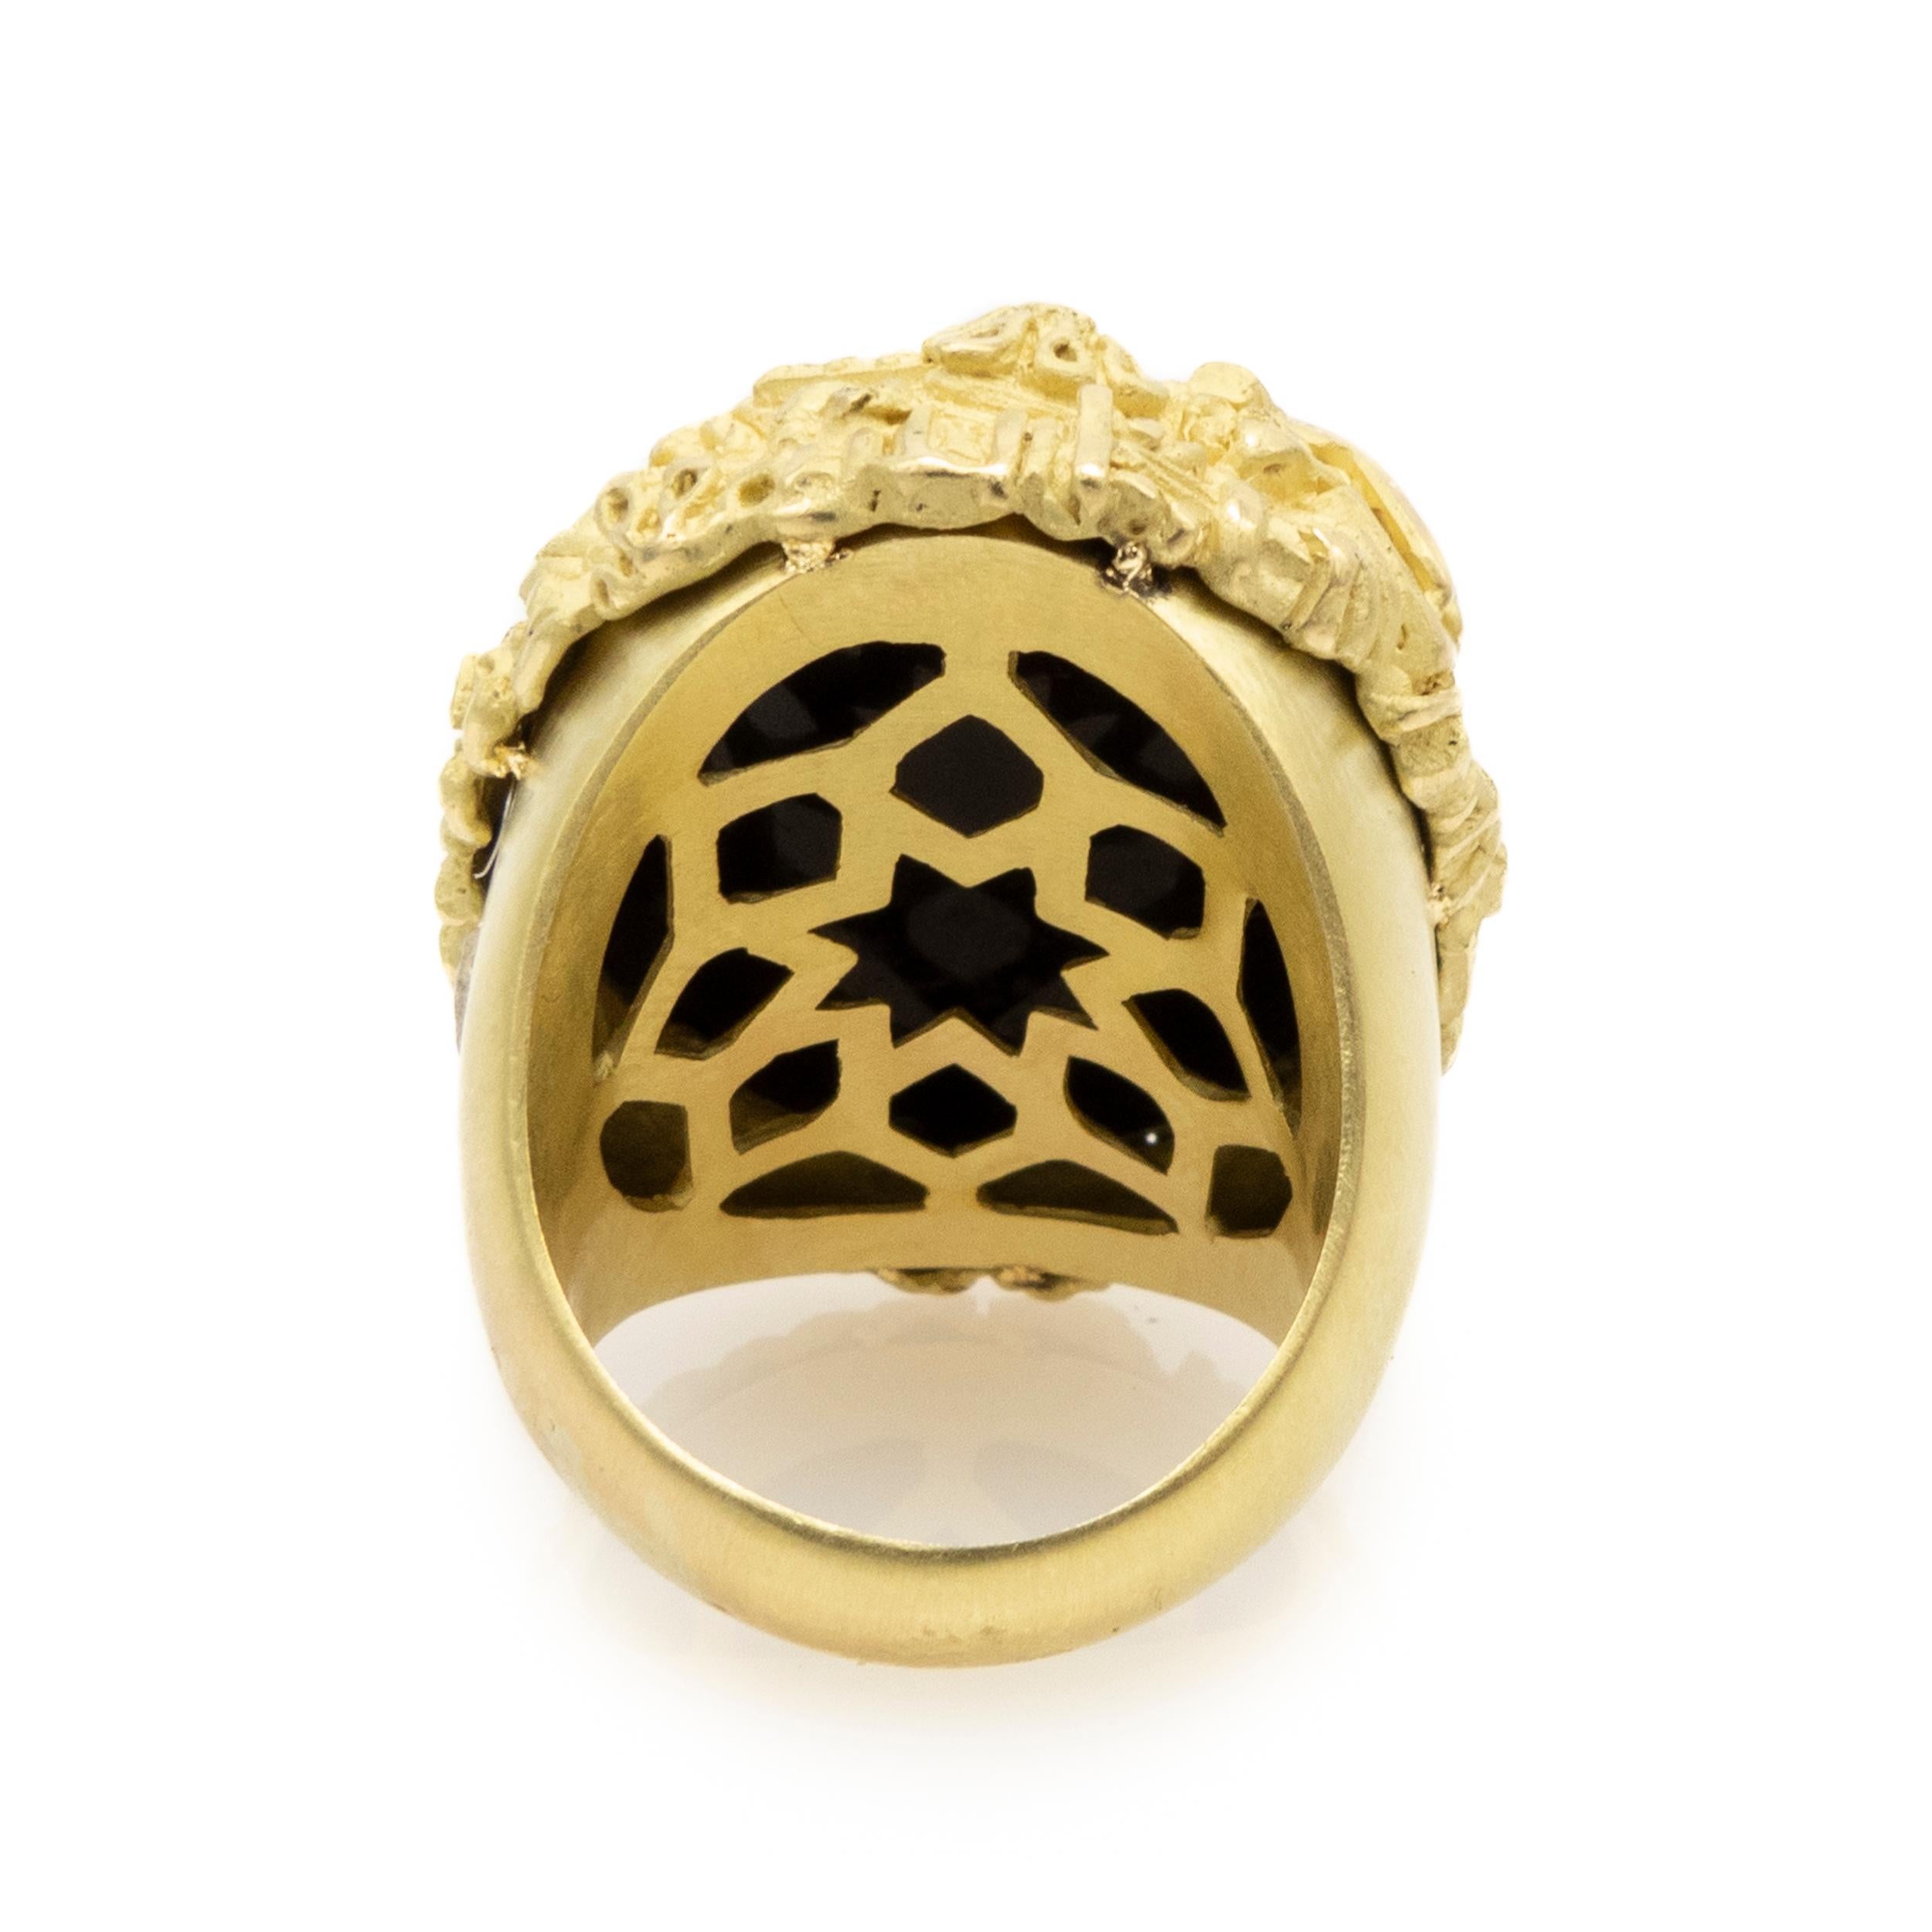 Modern Vicente Gracia 18k Gold Cocktail Dome Ring Micro Mosaic Ruins Roman Temple  For Sale